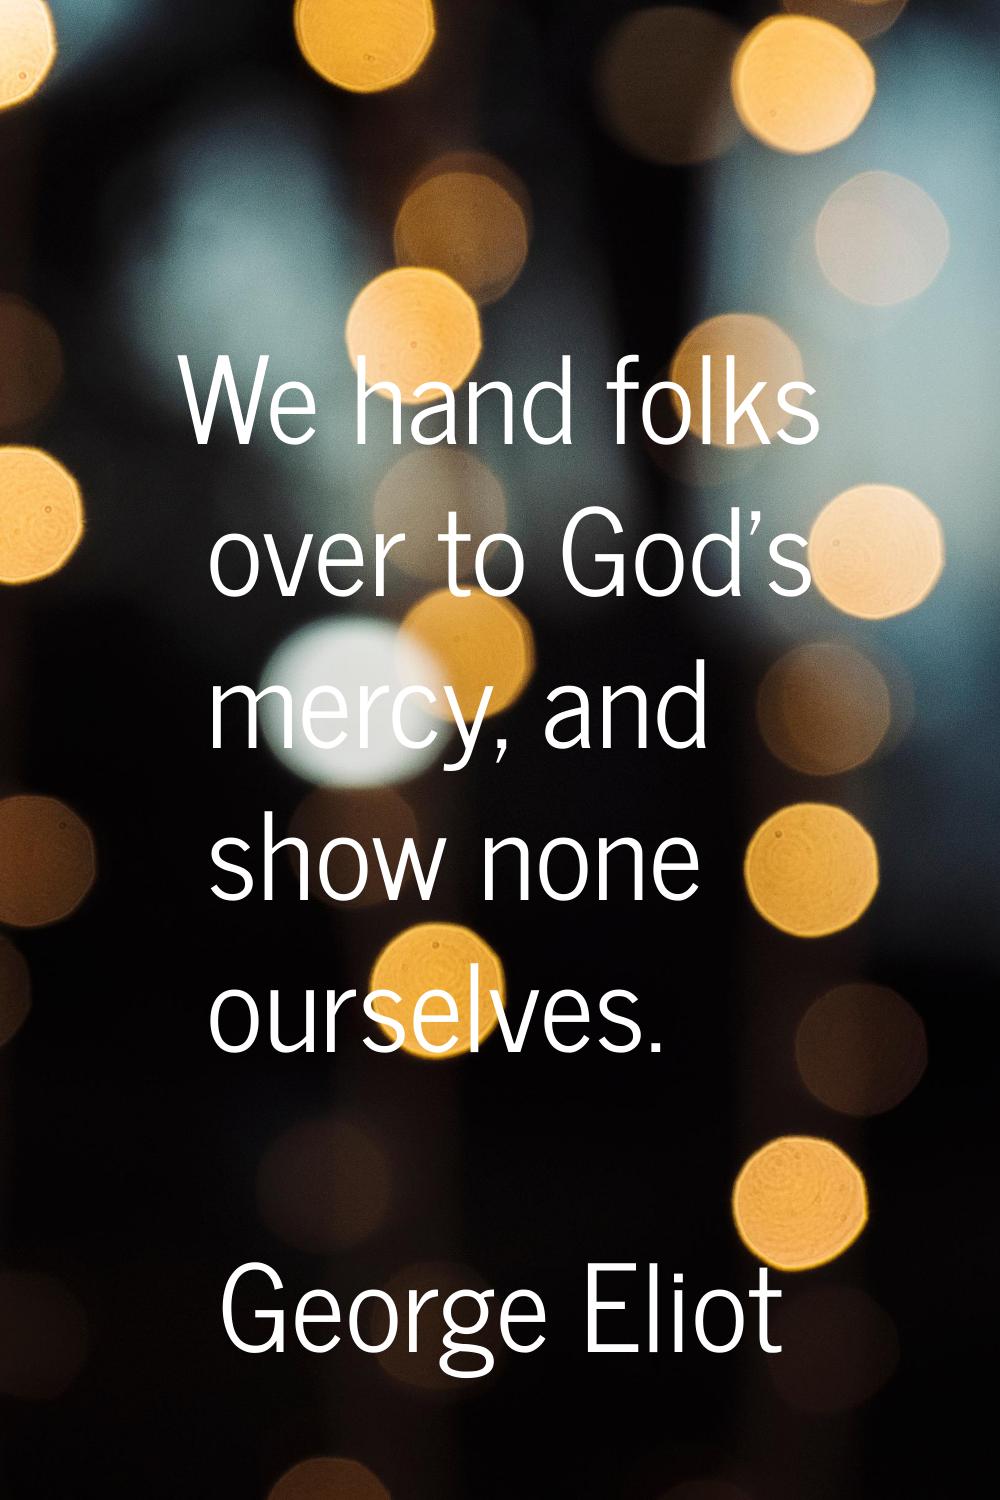 We hand folks over to God's mercy, and show none ourselves.